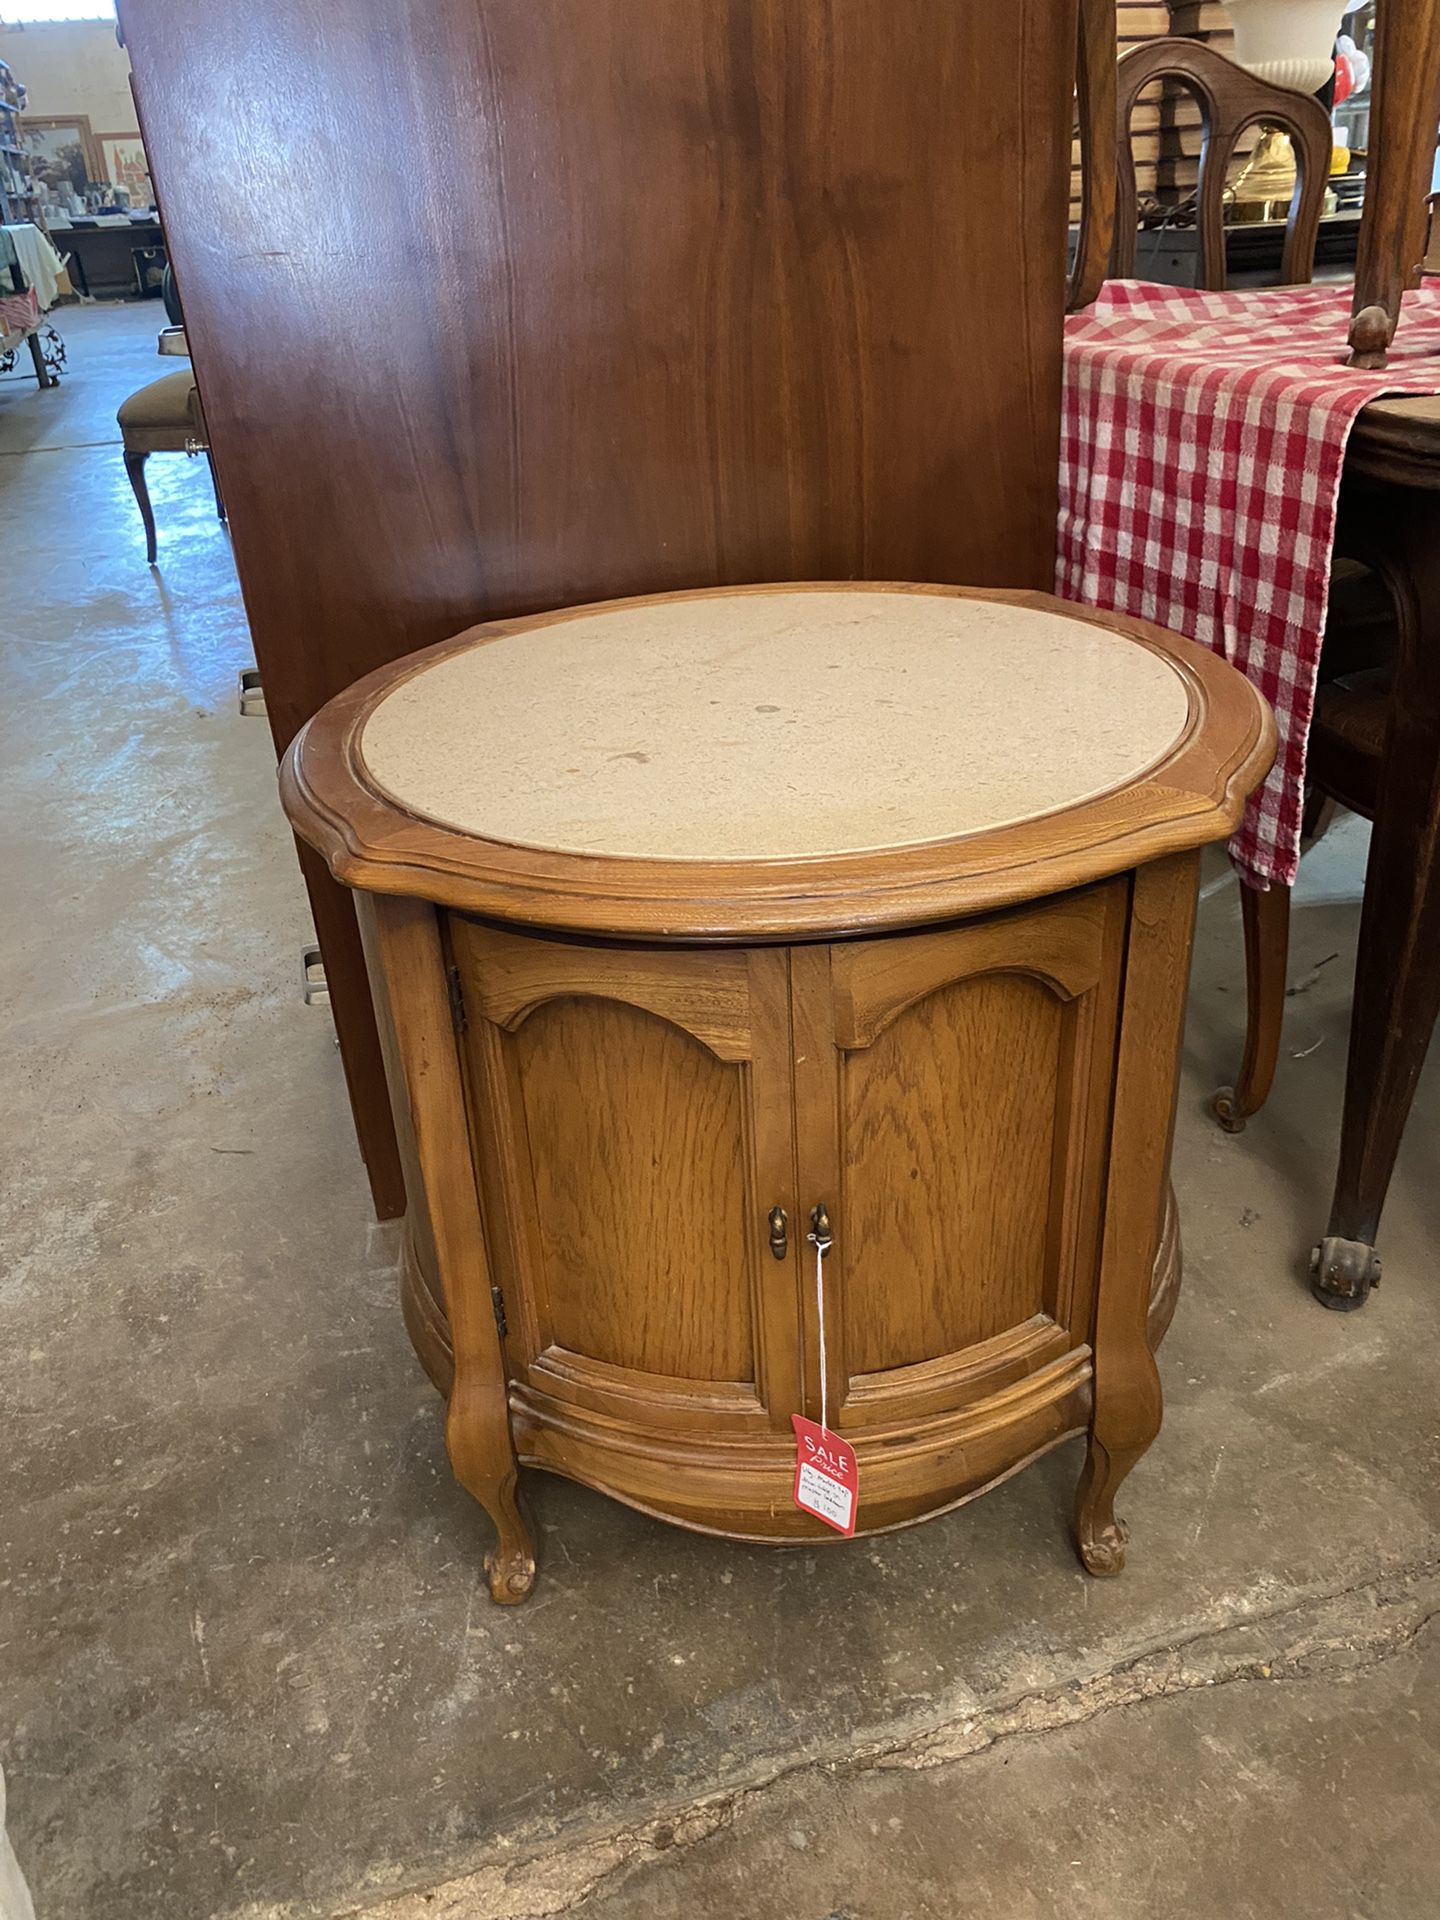 Vintage Marble Top Wood Barrel Style End Table Cabinet